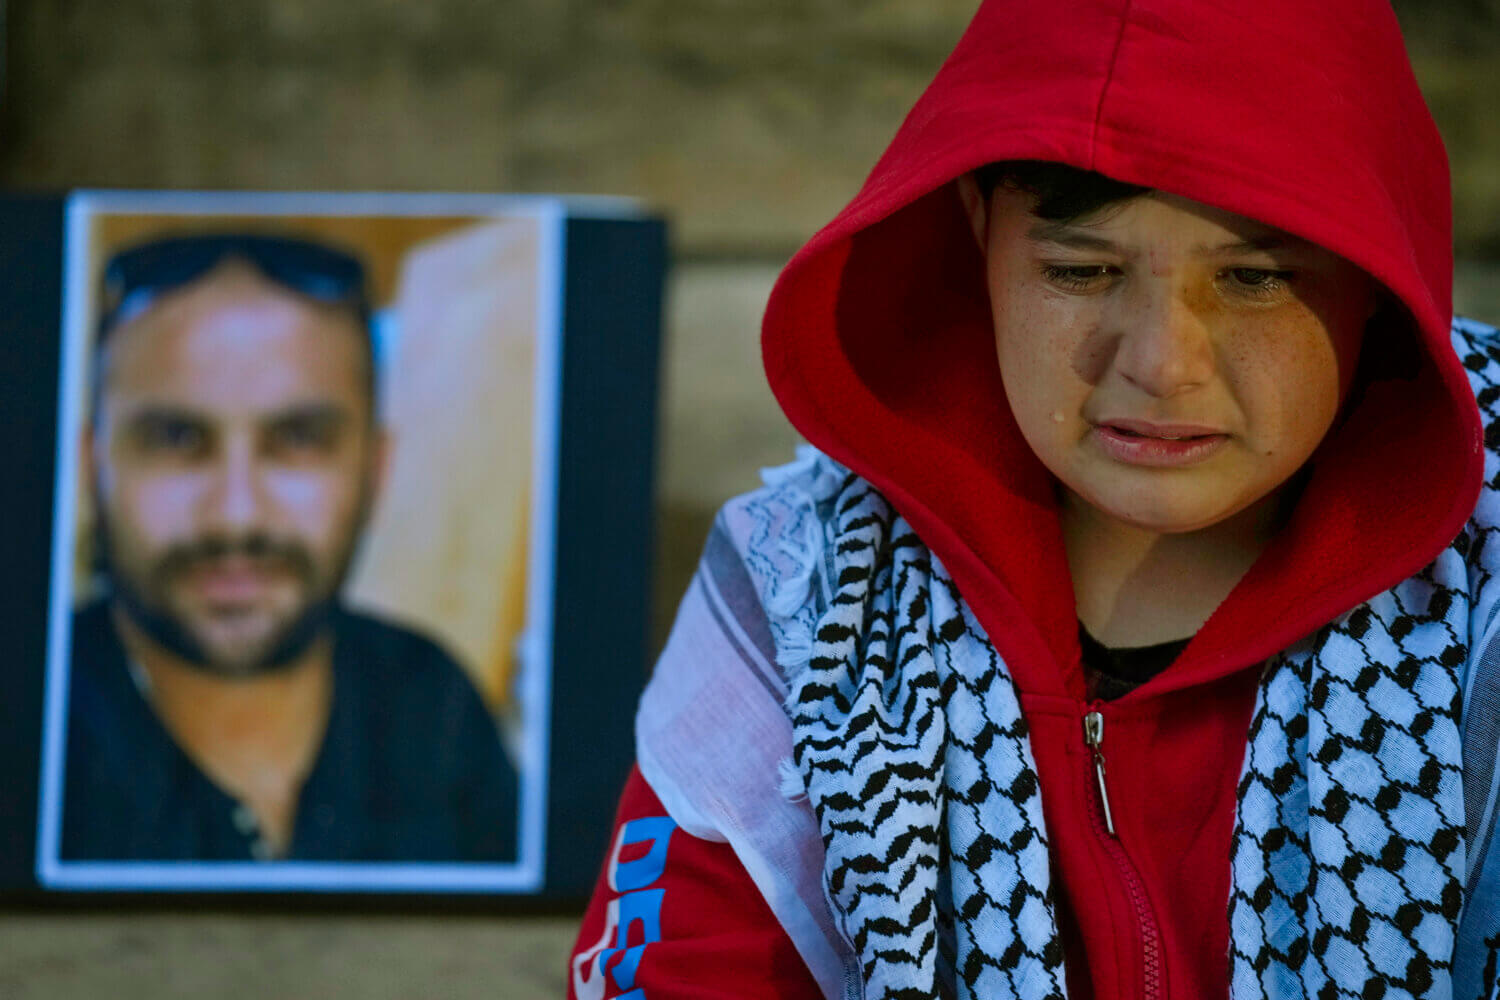 The image shows a young person in a red hooded jacket, visibly upset with tears on their cheeks. They are sitting beside a framed portrait of a man who is out of focus. The man in the photo appears to have a beard and is wearing sunglasses. The young person is wearing a traditional black and white keffiyeh around their neck, suggesting cultural significance. The background is a blurred stone wall, emphasizing a solemn atmosphere.